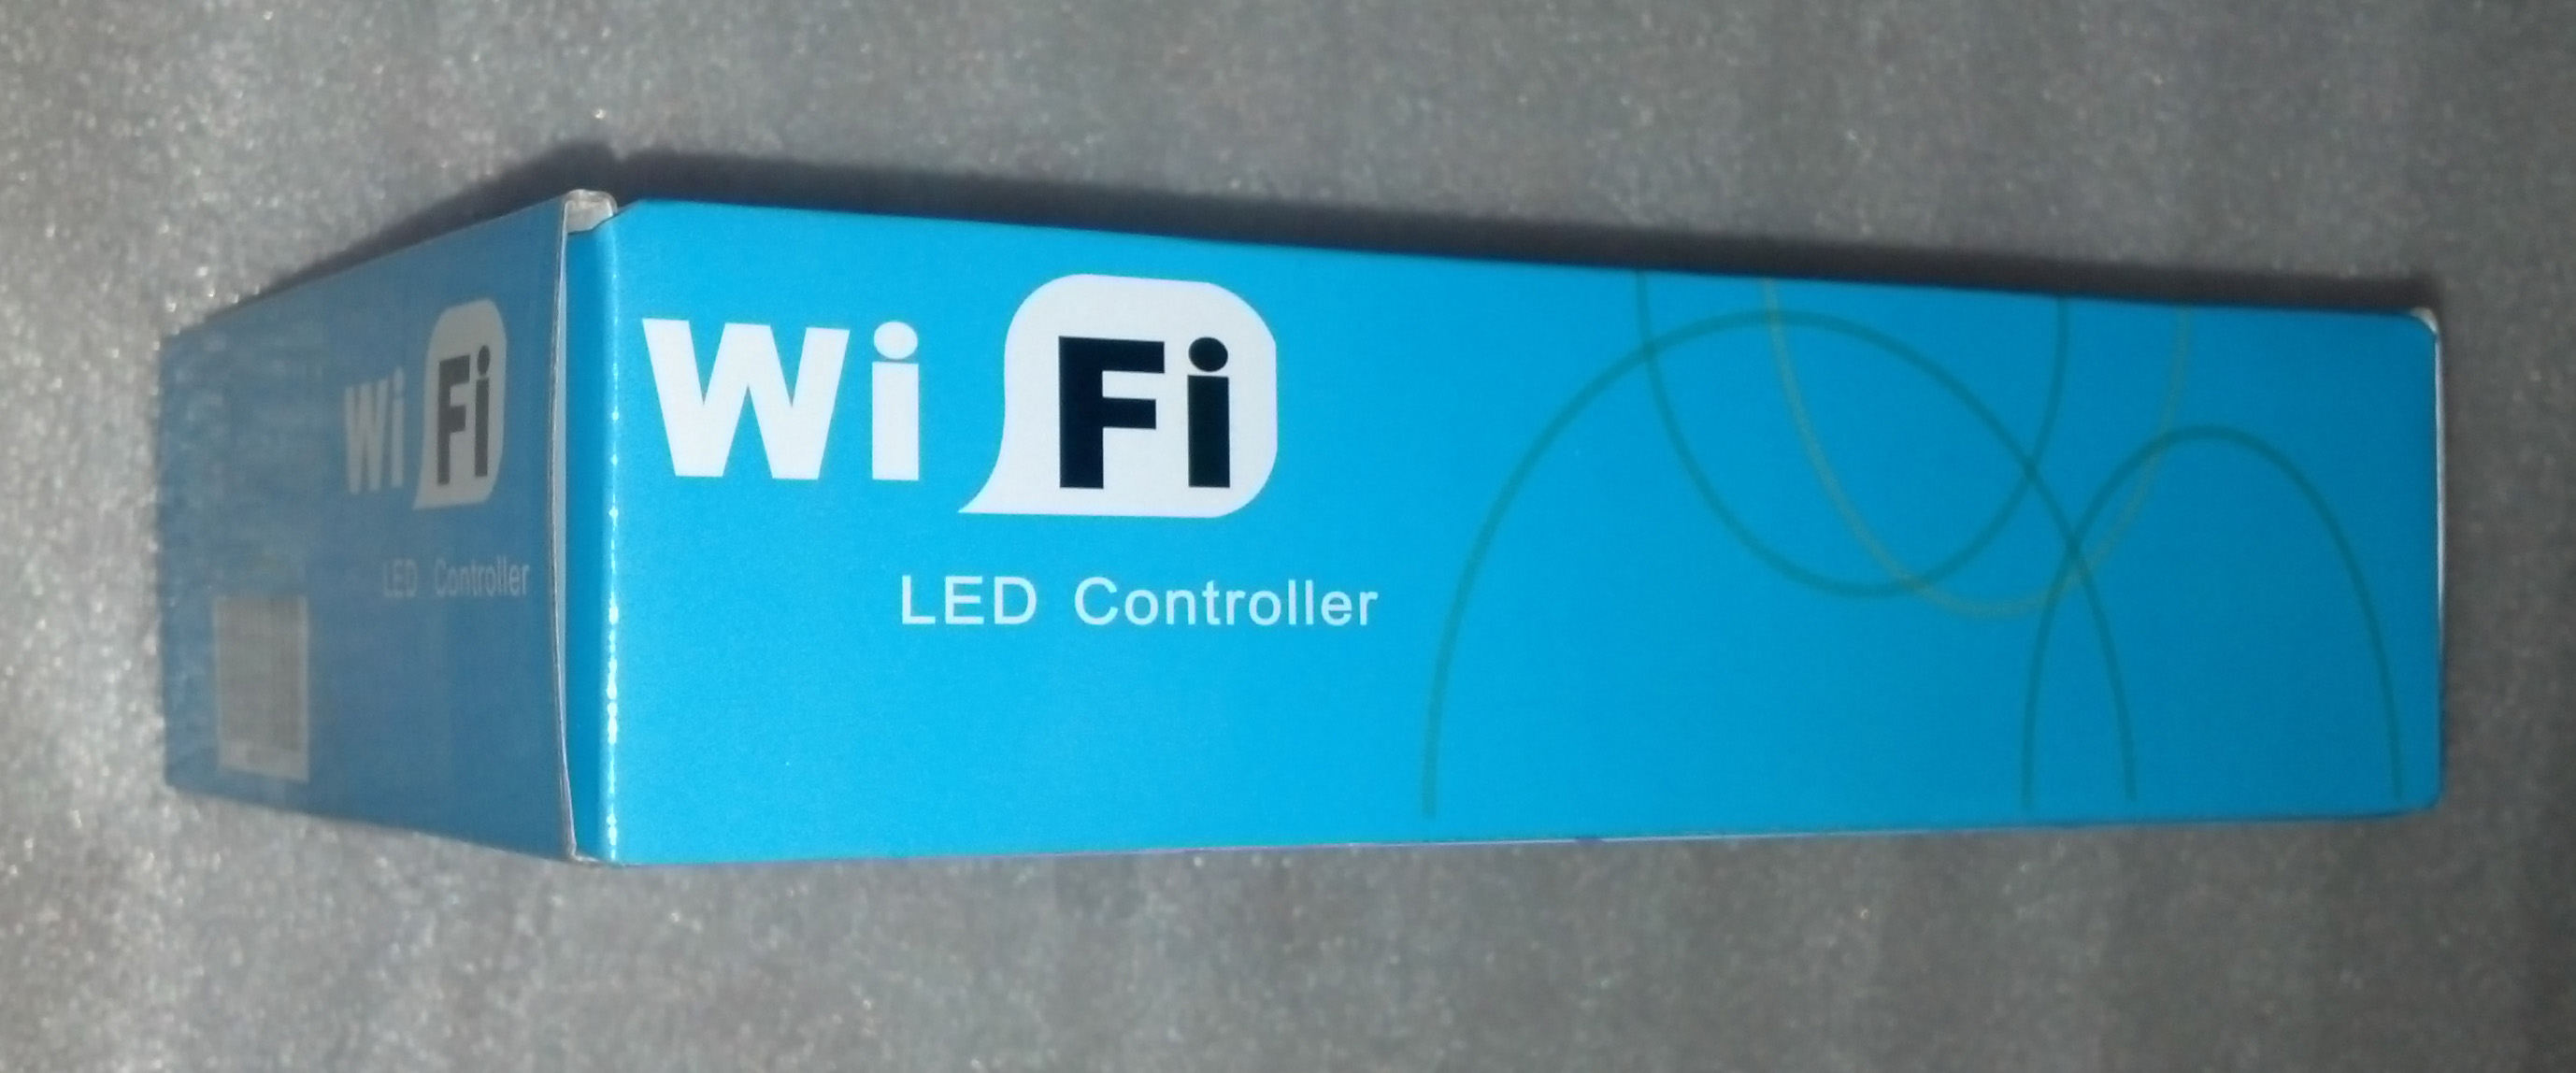 black_WiFi_wireless_remote_RGB_LED_controller_package